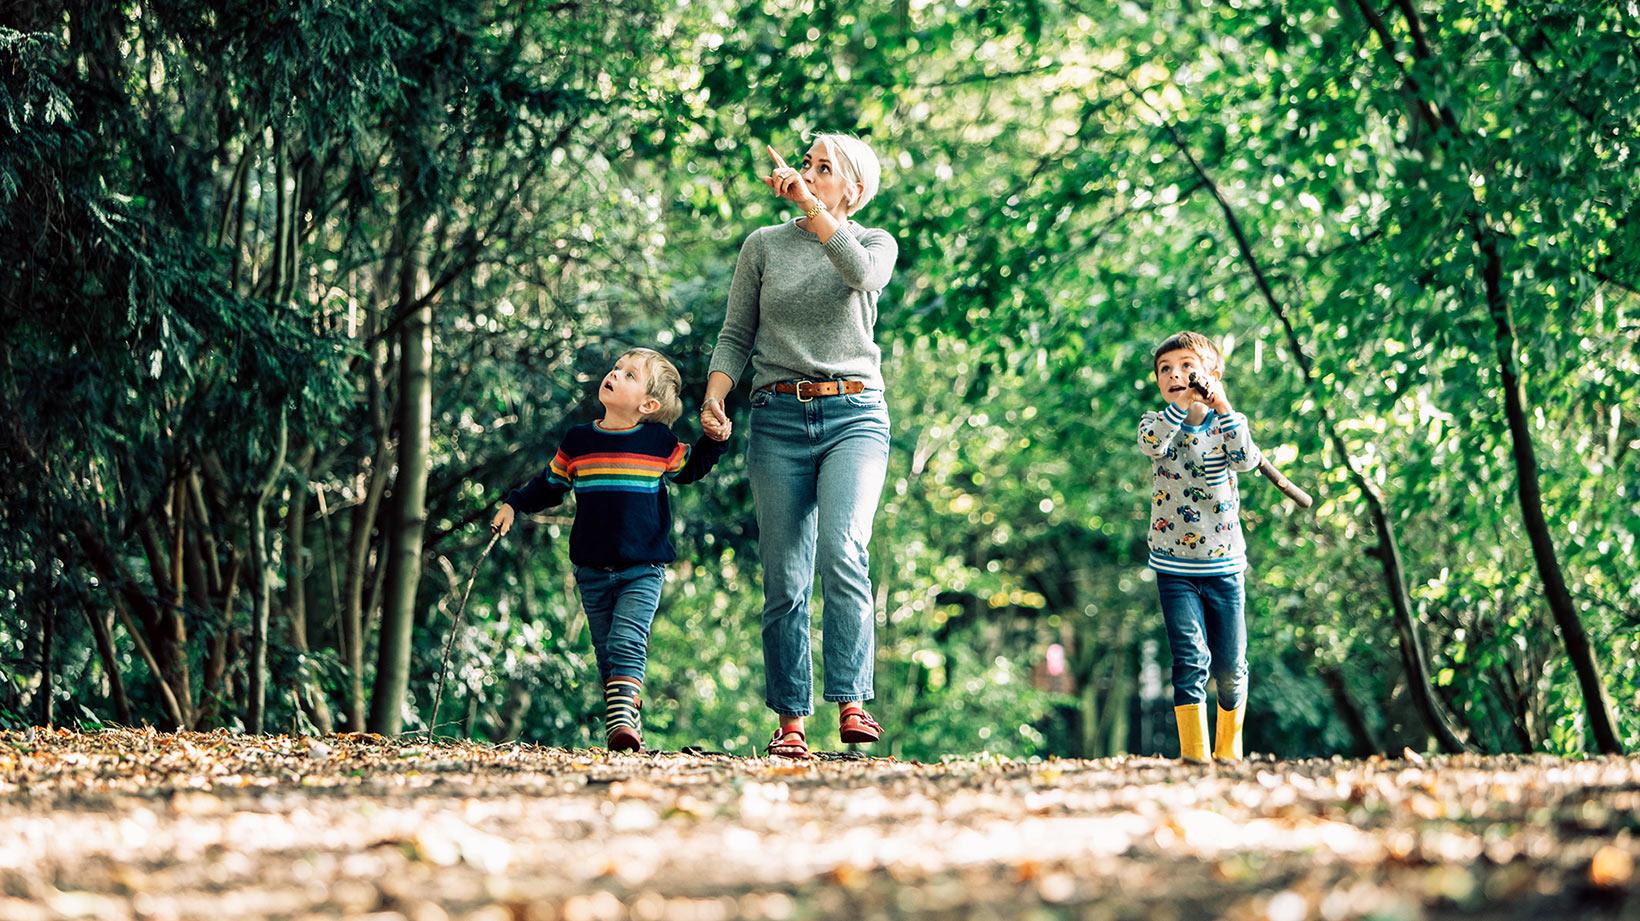 A woman walking through the woods with her two small children.